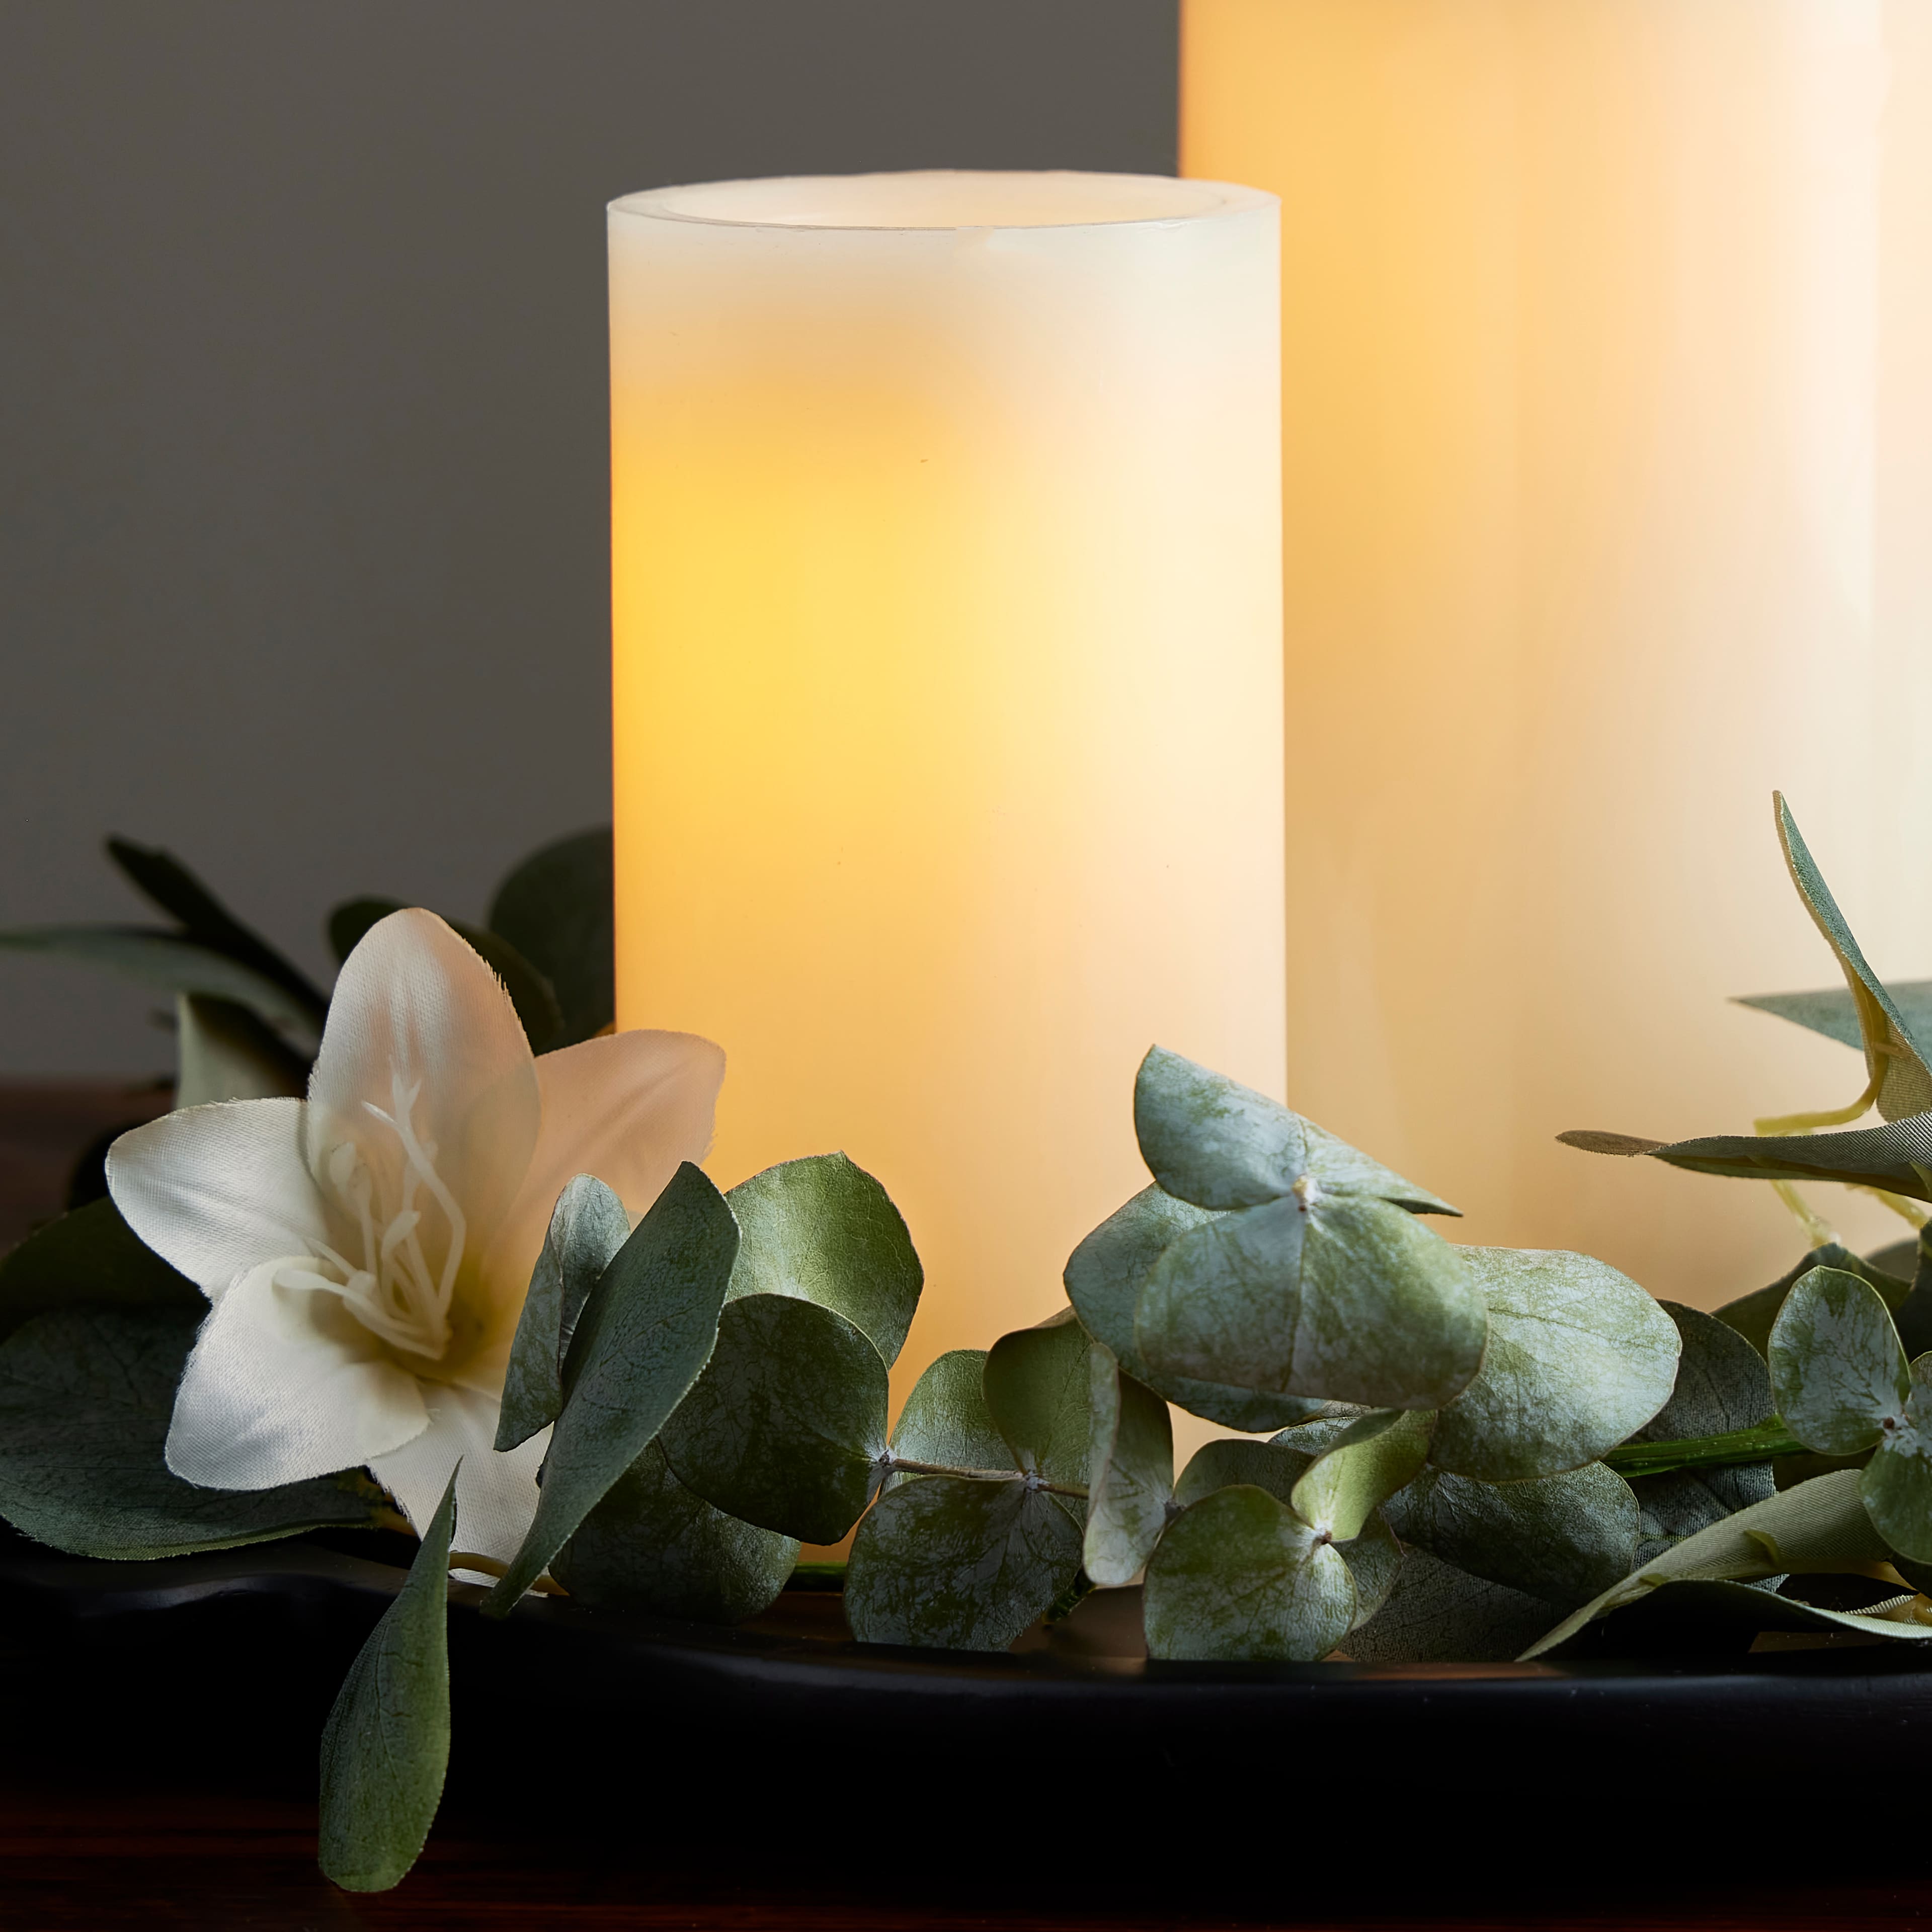 Unbreakable Glass Battery Operated Plexiglass LED Pillar Radiance Candles with Remote Control and Timer 5plots 3” x 6” White Flickering Flameless Candles